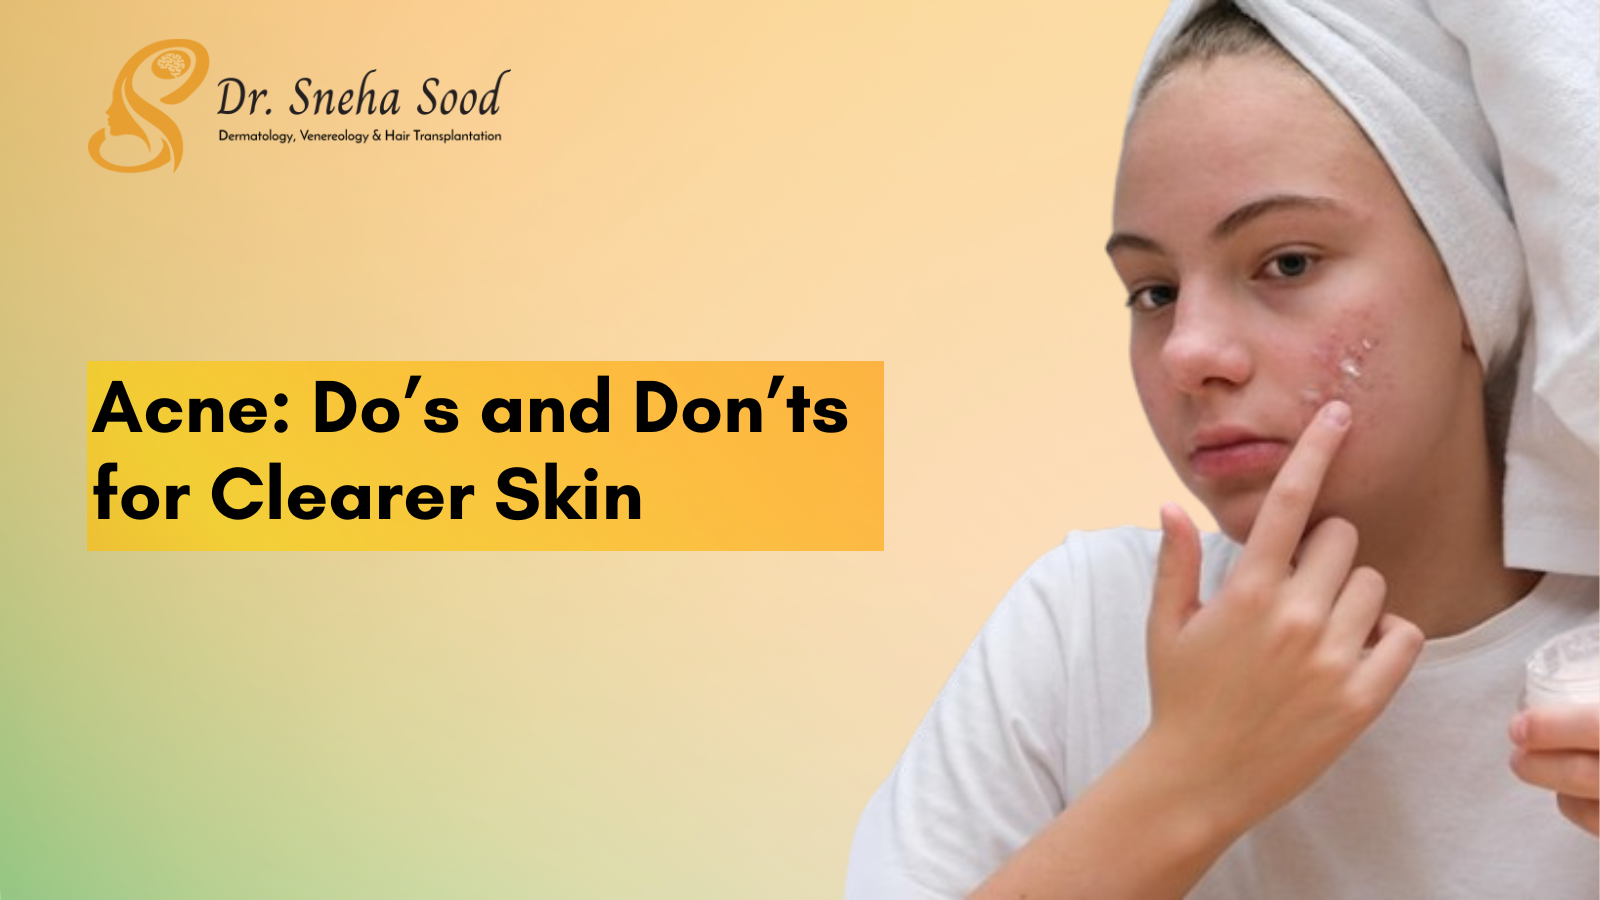 Acne: Do’s and Don’ts for Clearer Skin